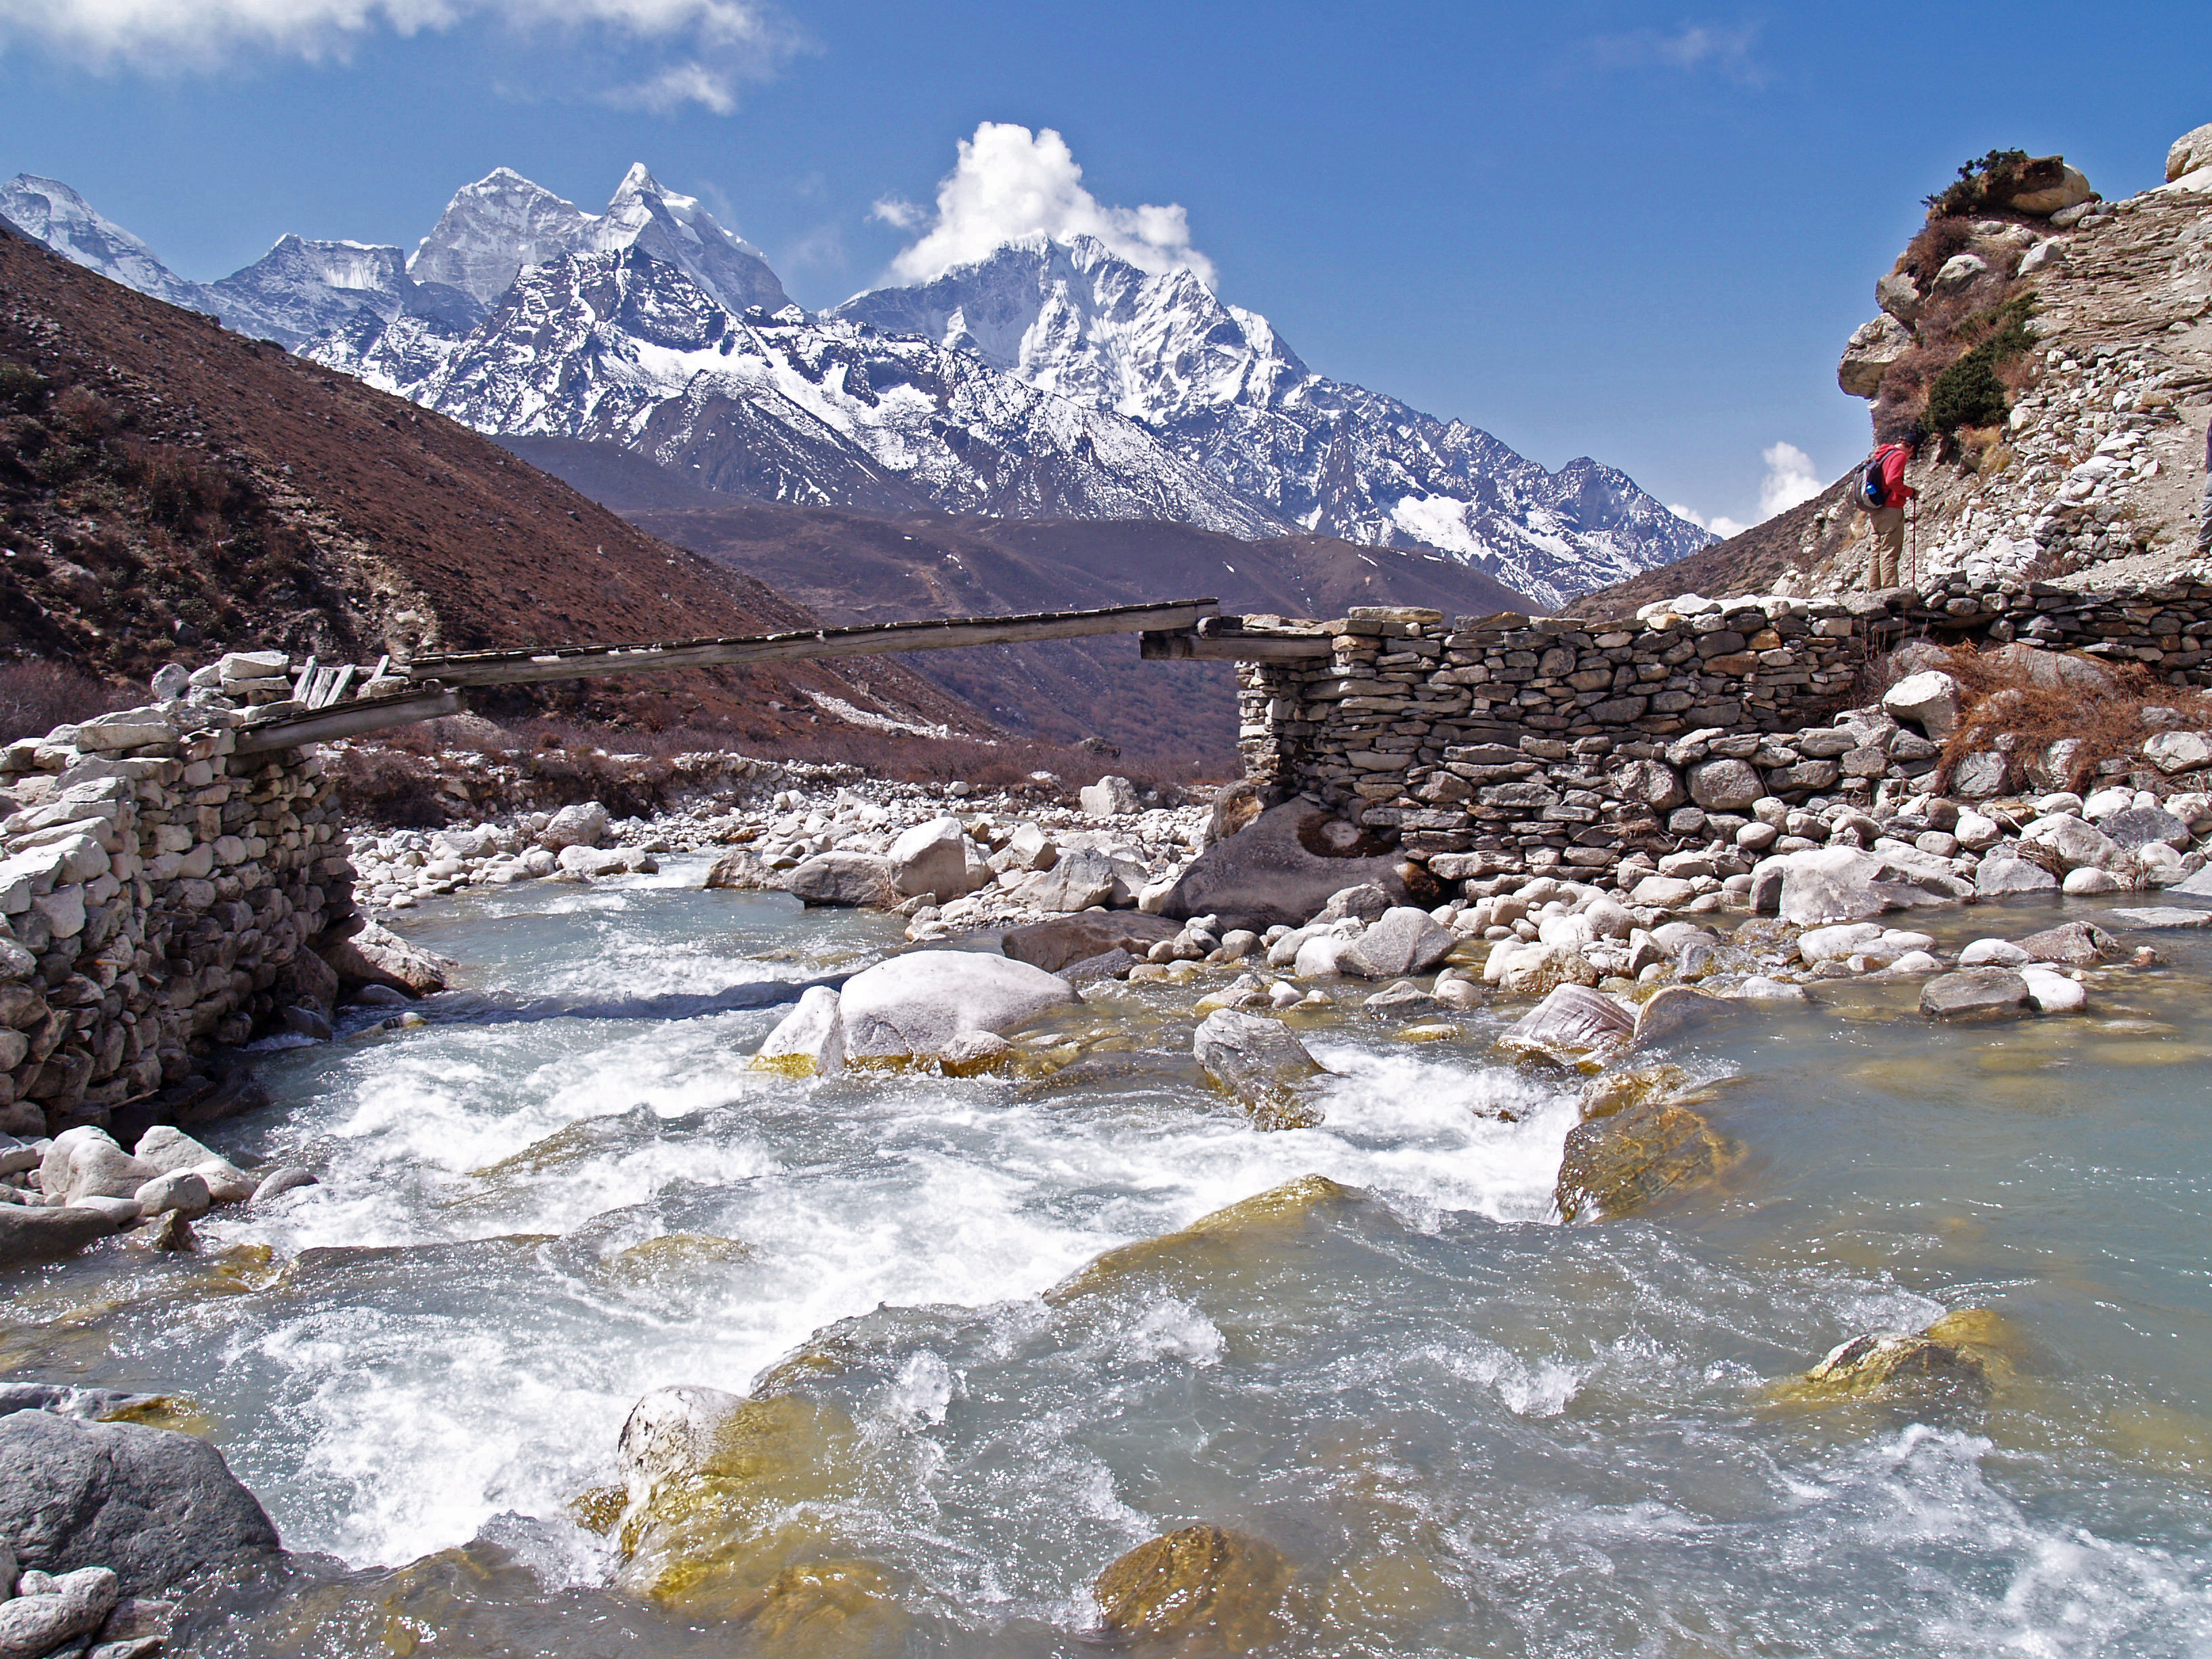 File:The Himalayas summed up in one picture!.jpg - Wikimedia Commons